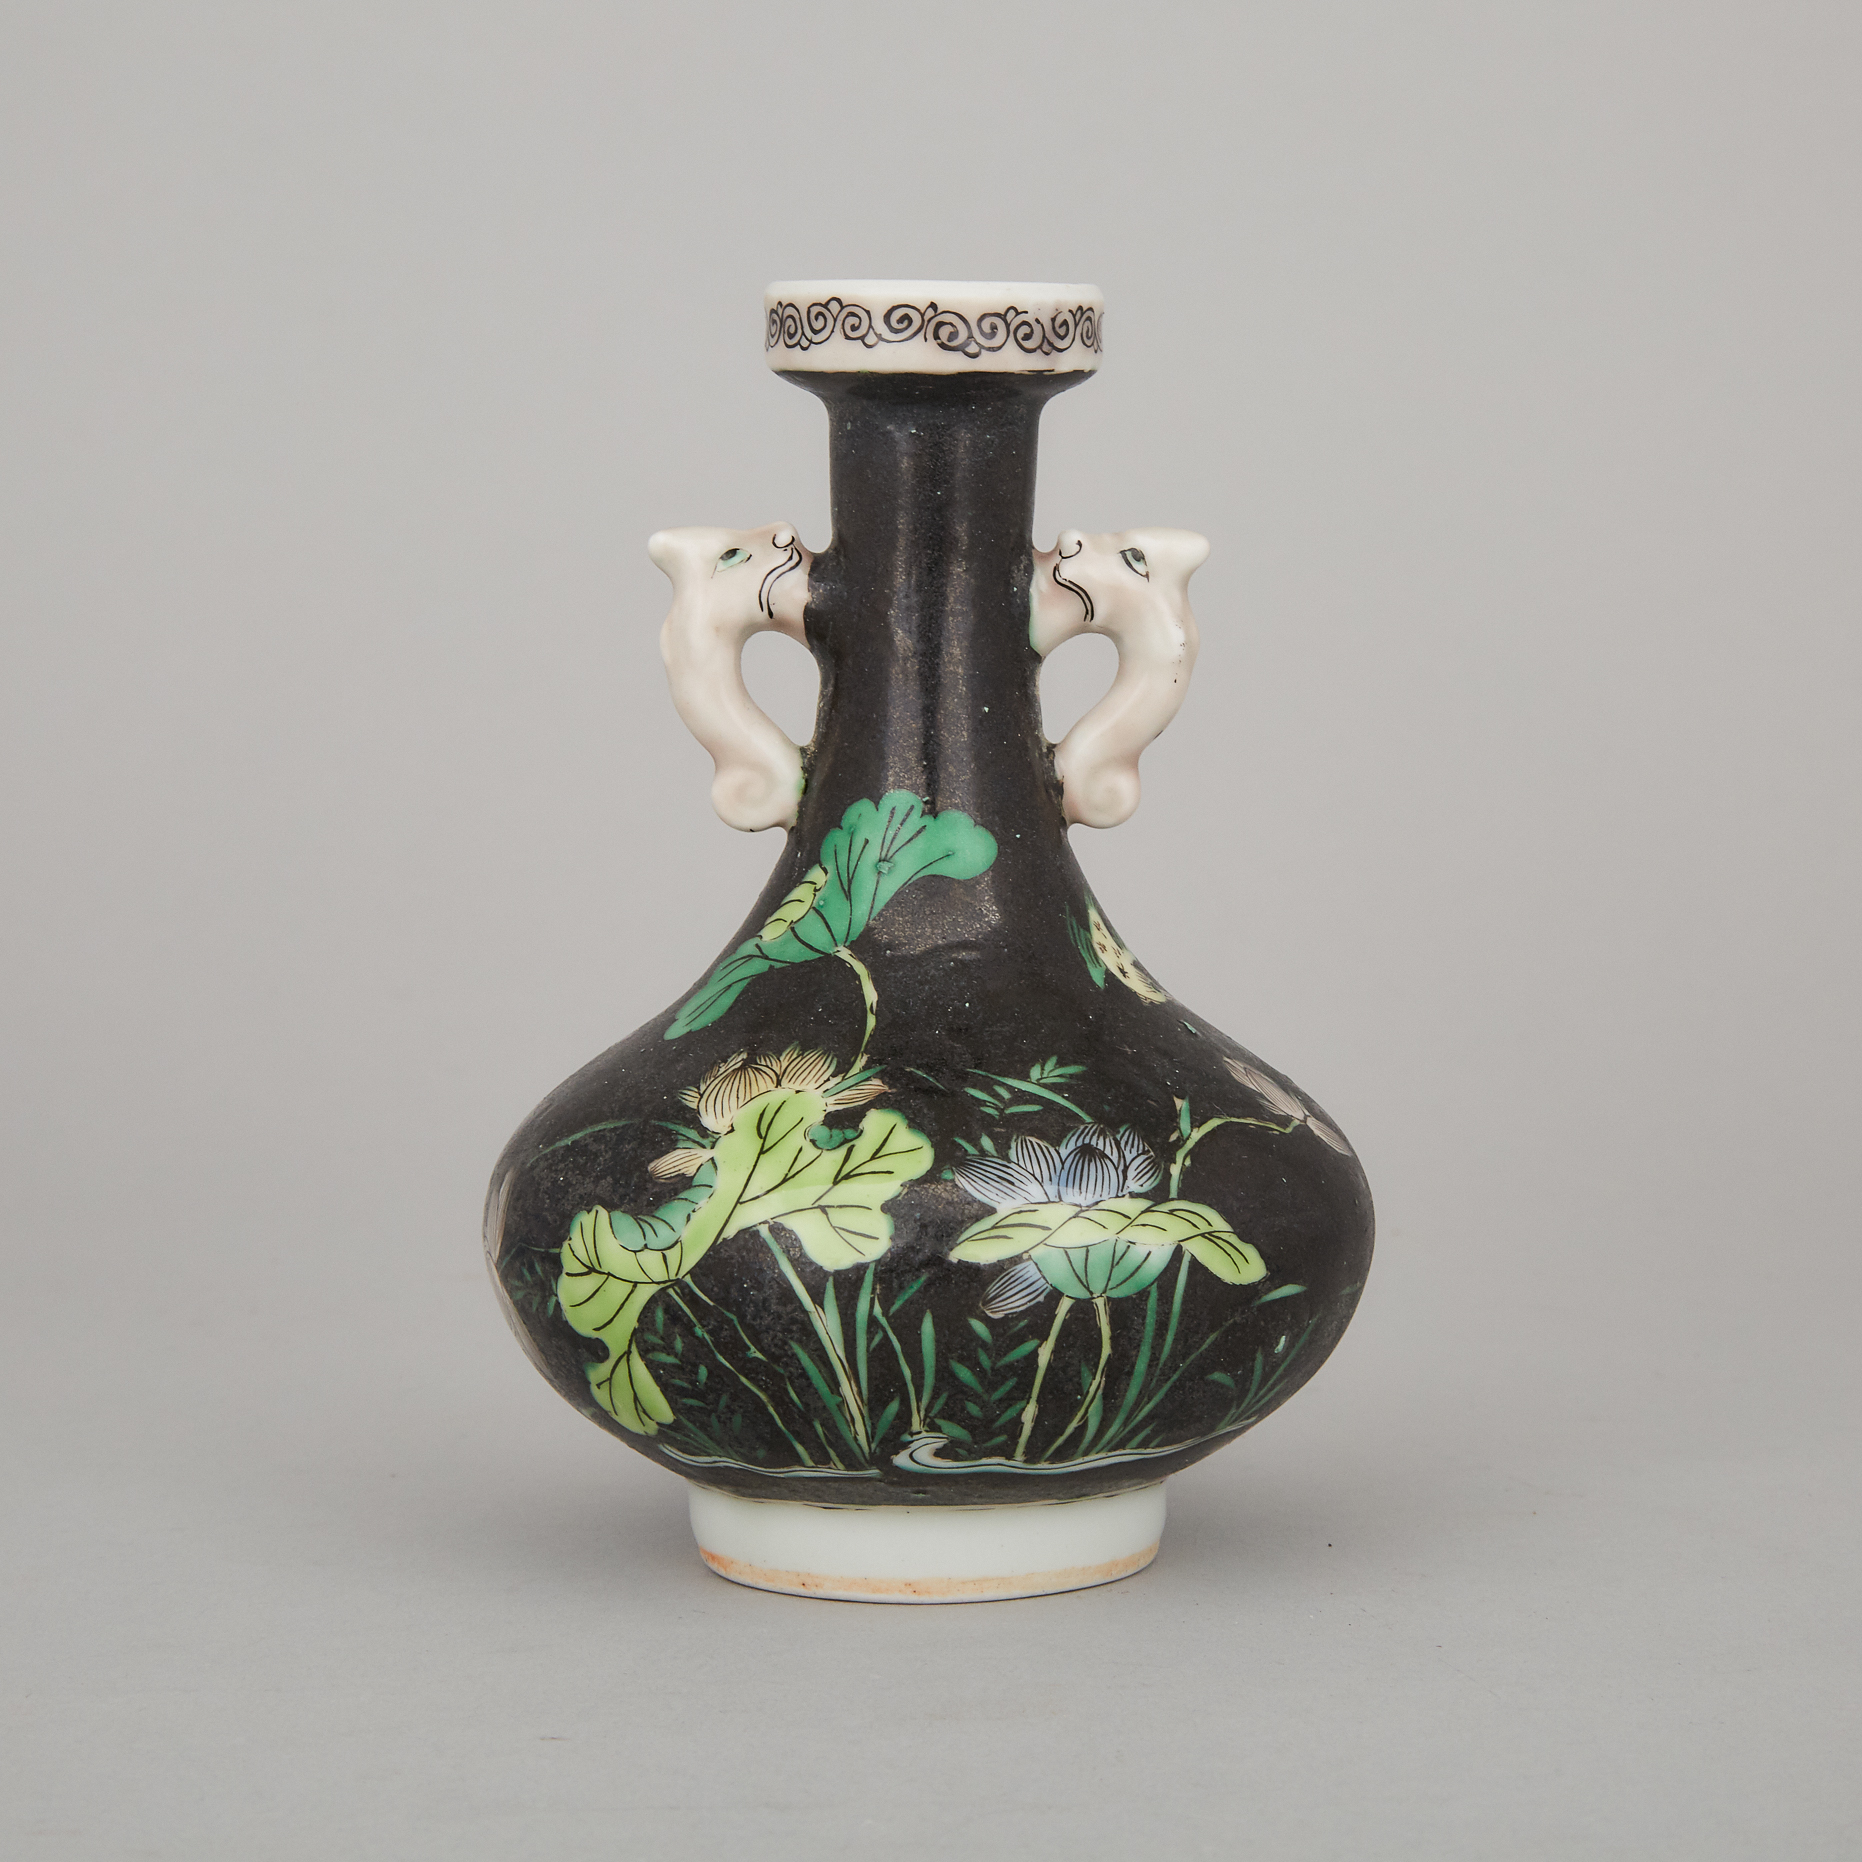 A Small Kangxi-Style Famille Noire Vase